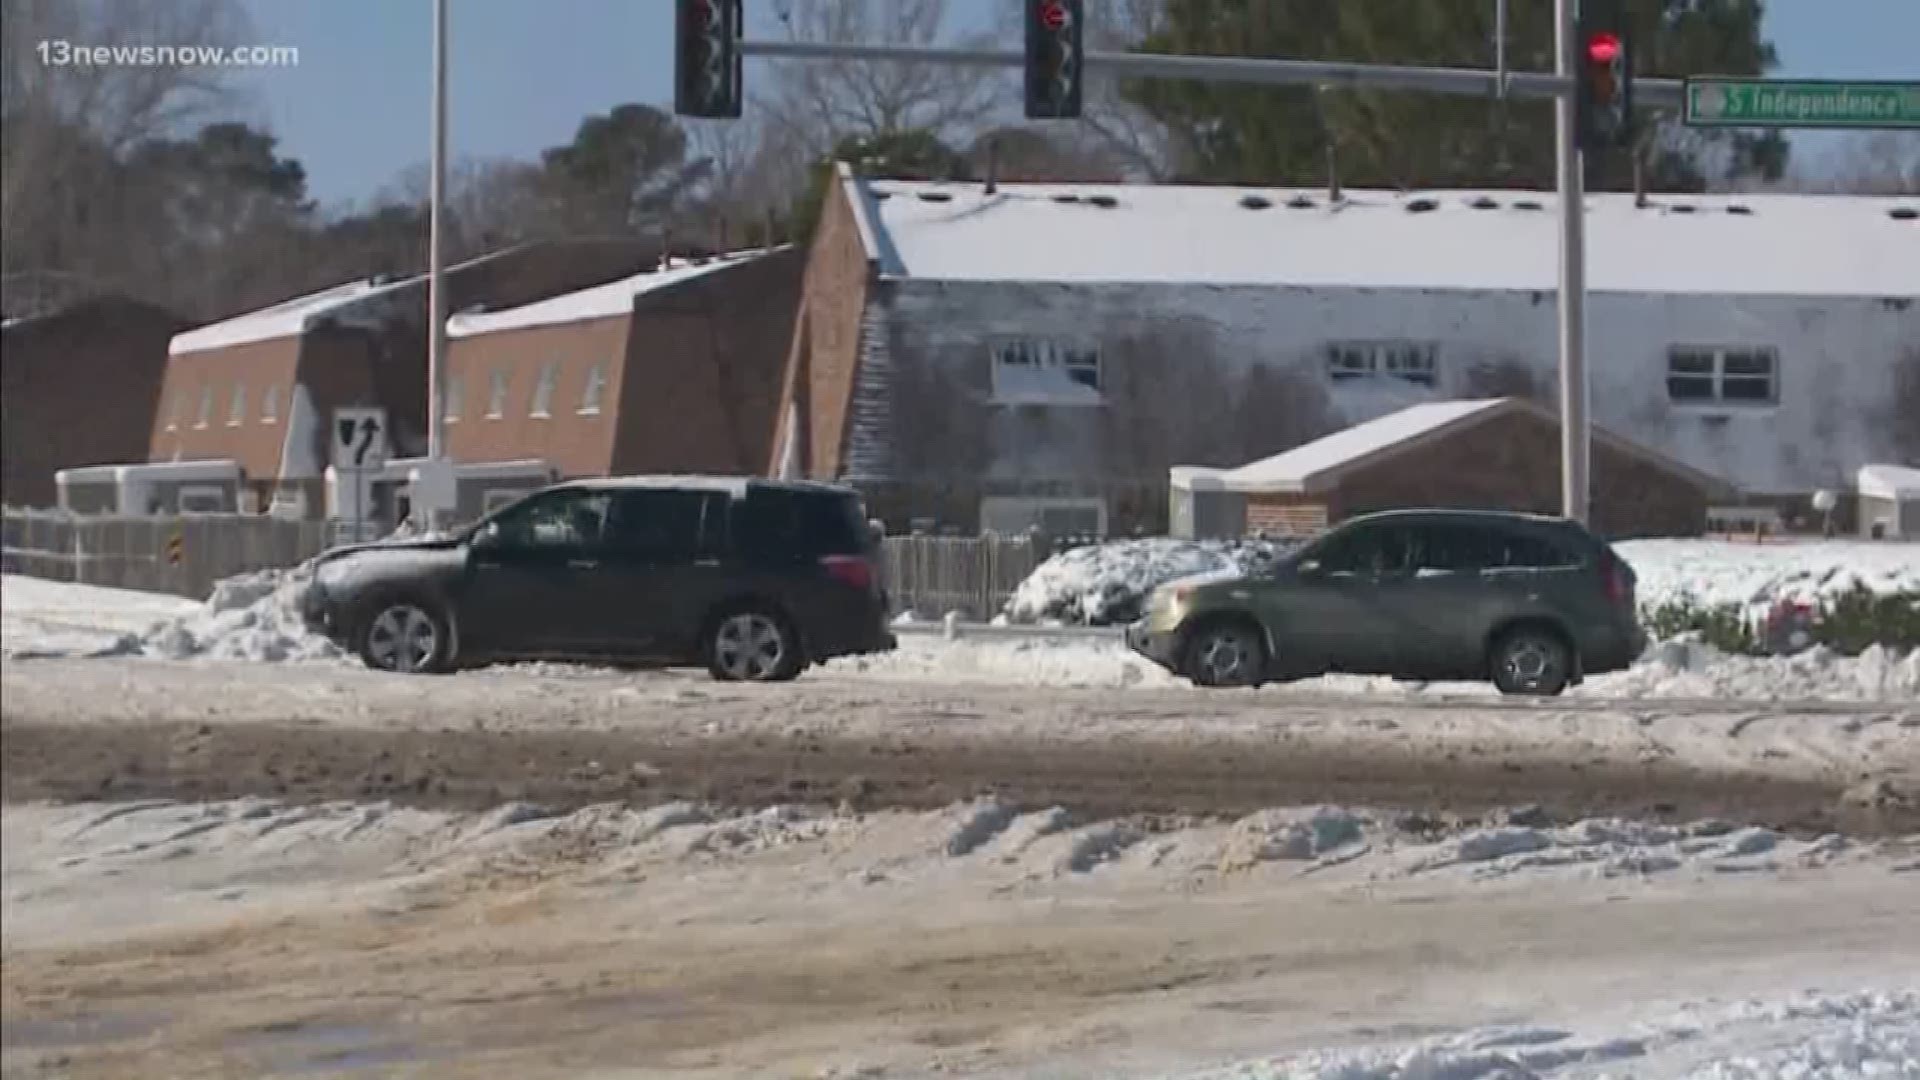 Road snow removal continues, day after winter storm